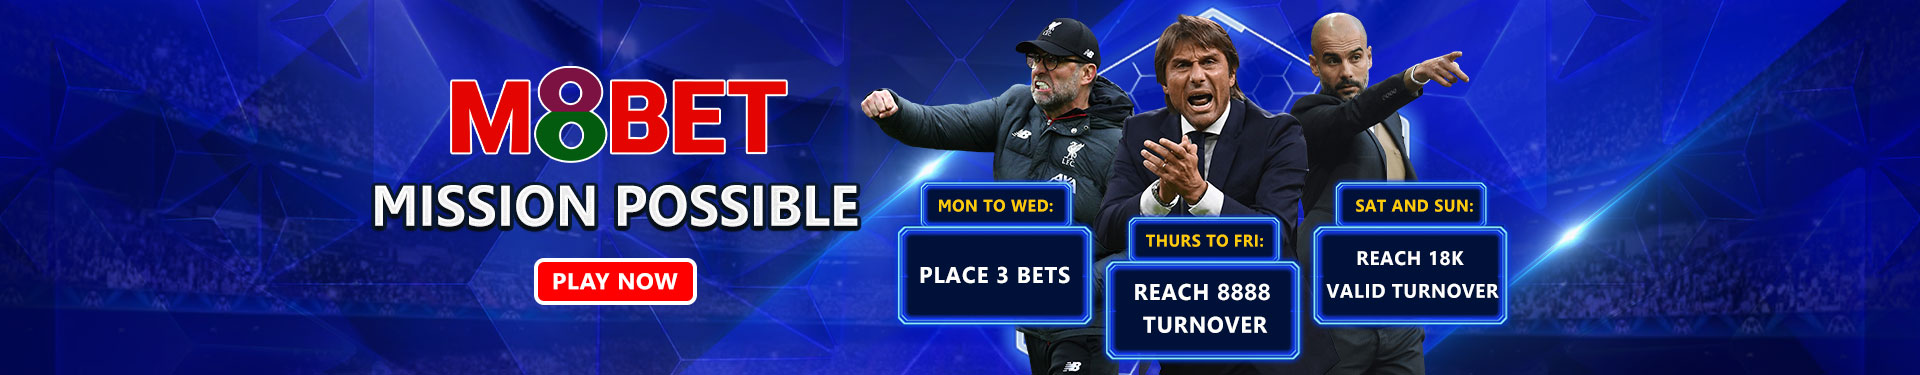 EPL Betting odds